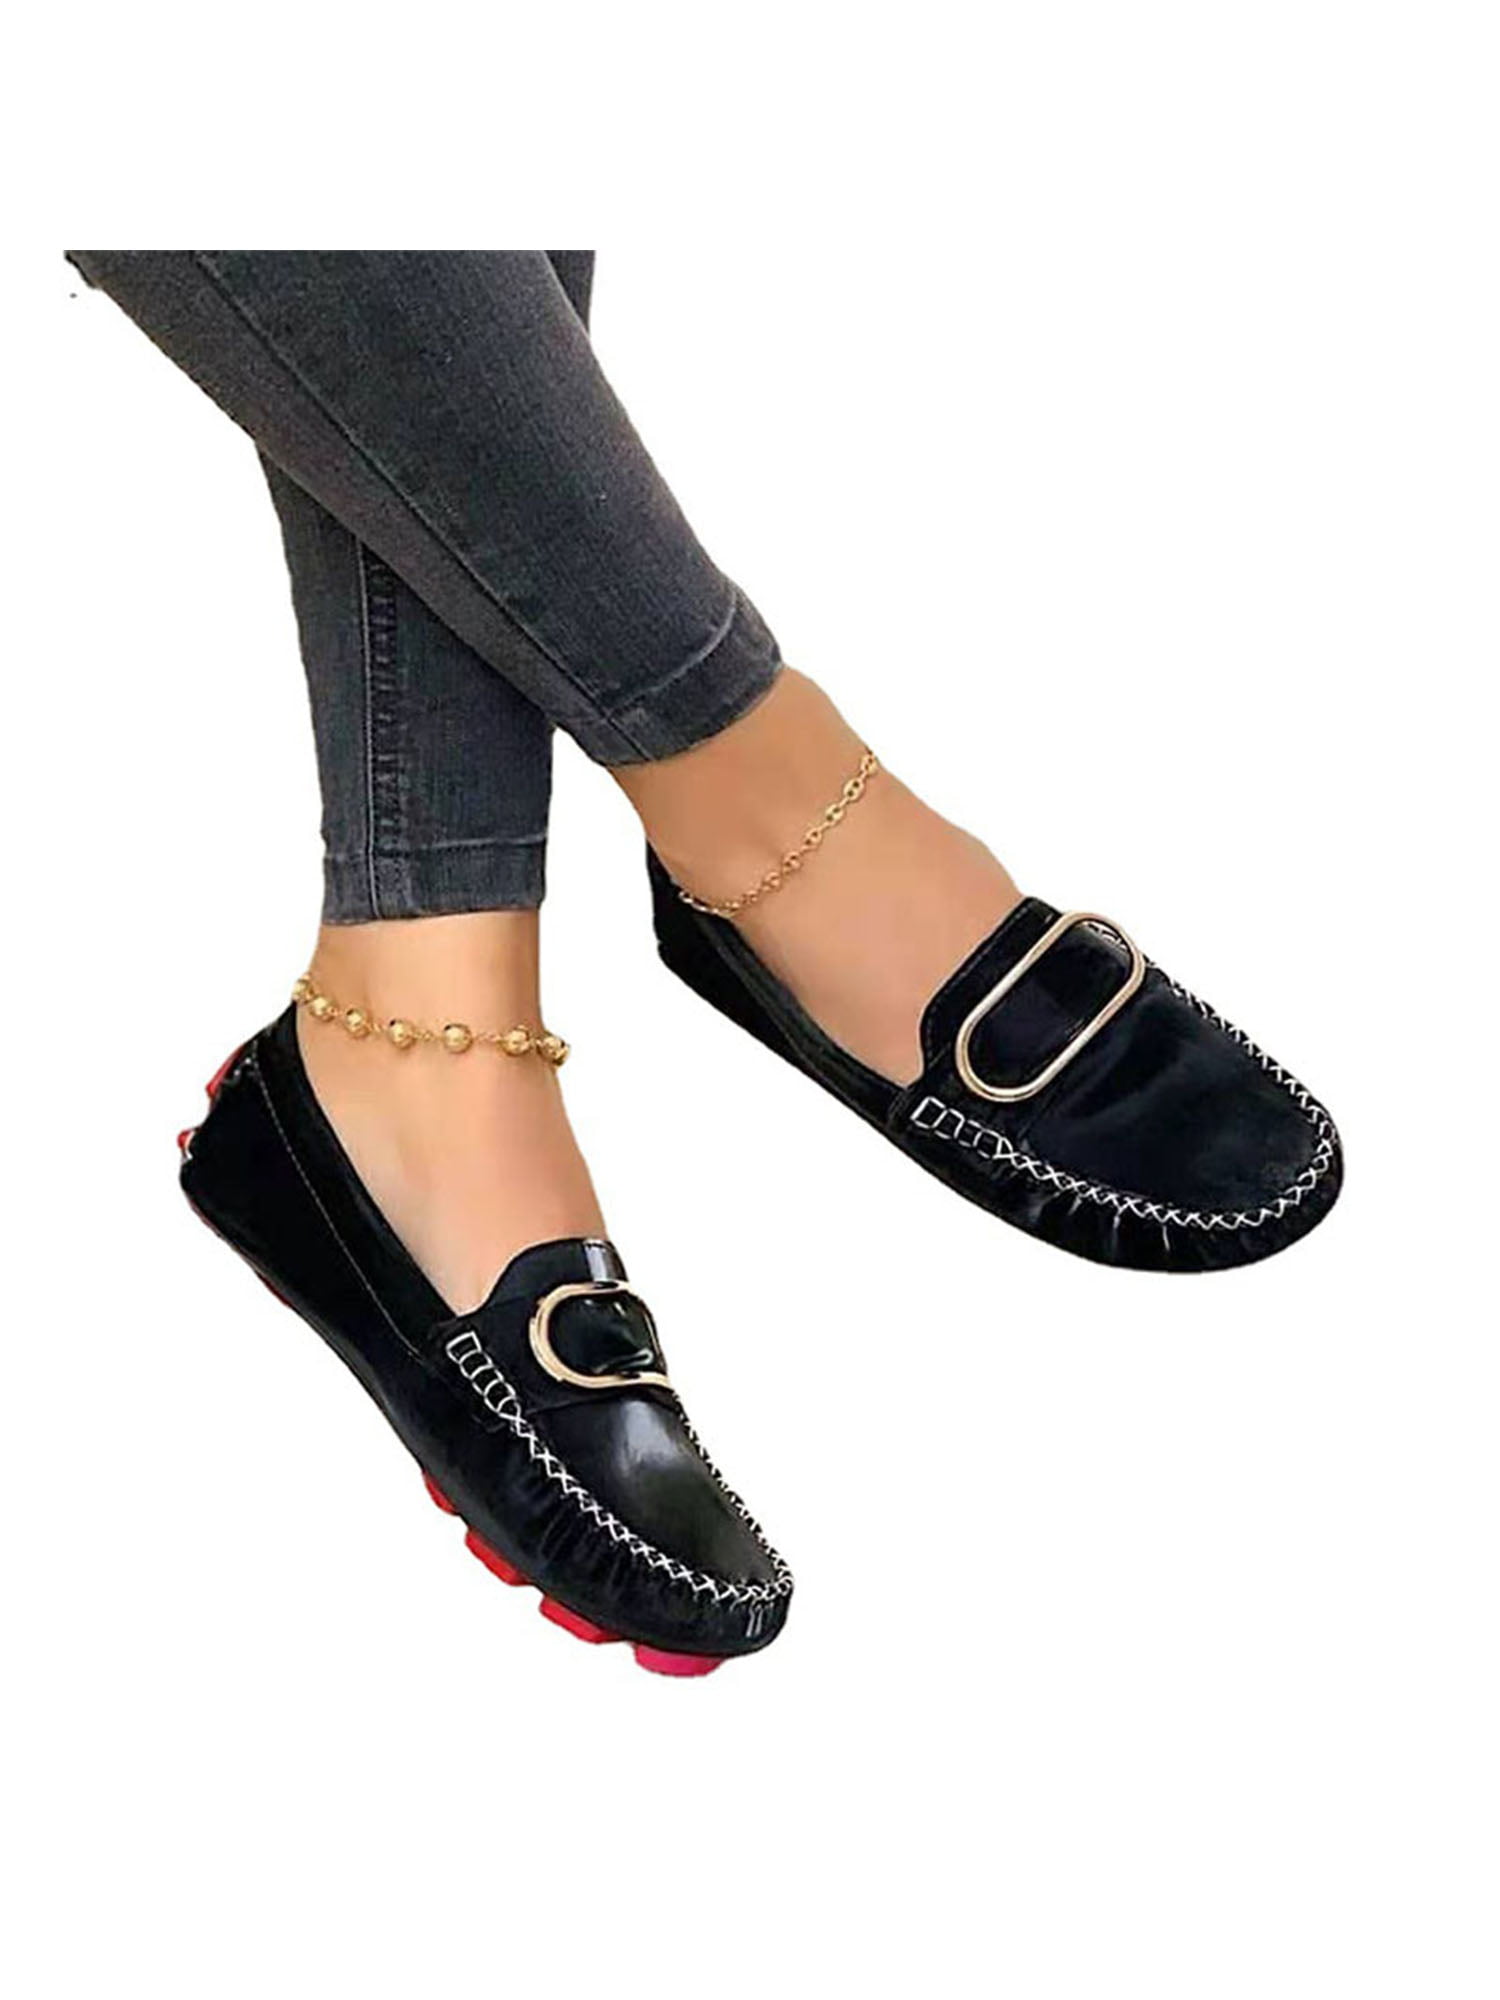 New Moccasins Shoes Woman Loafers Oxford Shoes for Women Flats Loafers